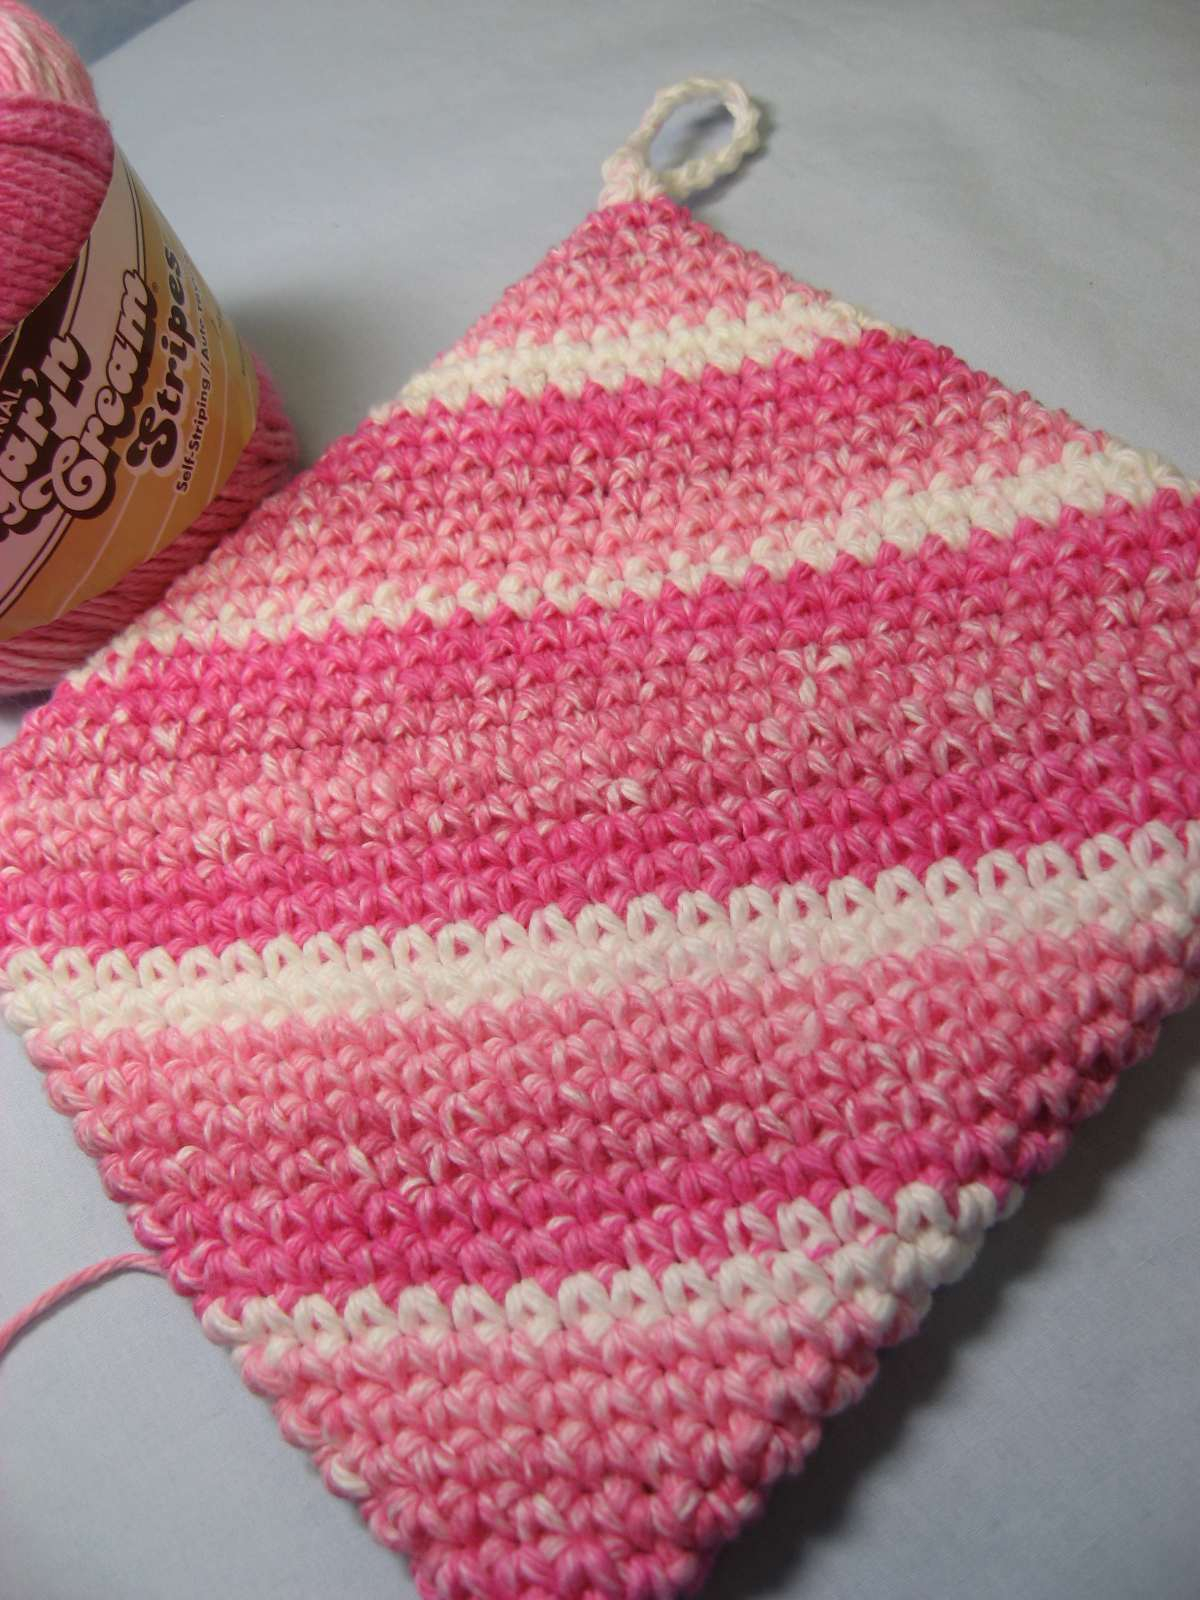 Thick Crochet Potholder Pattern Hooked On Needles Crocheted Hot Padpotholder Its Double Thick